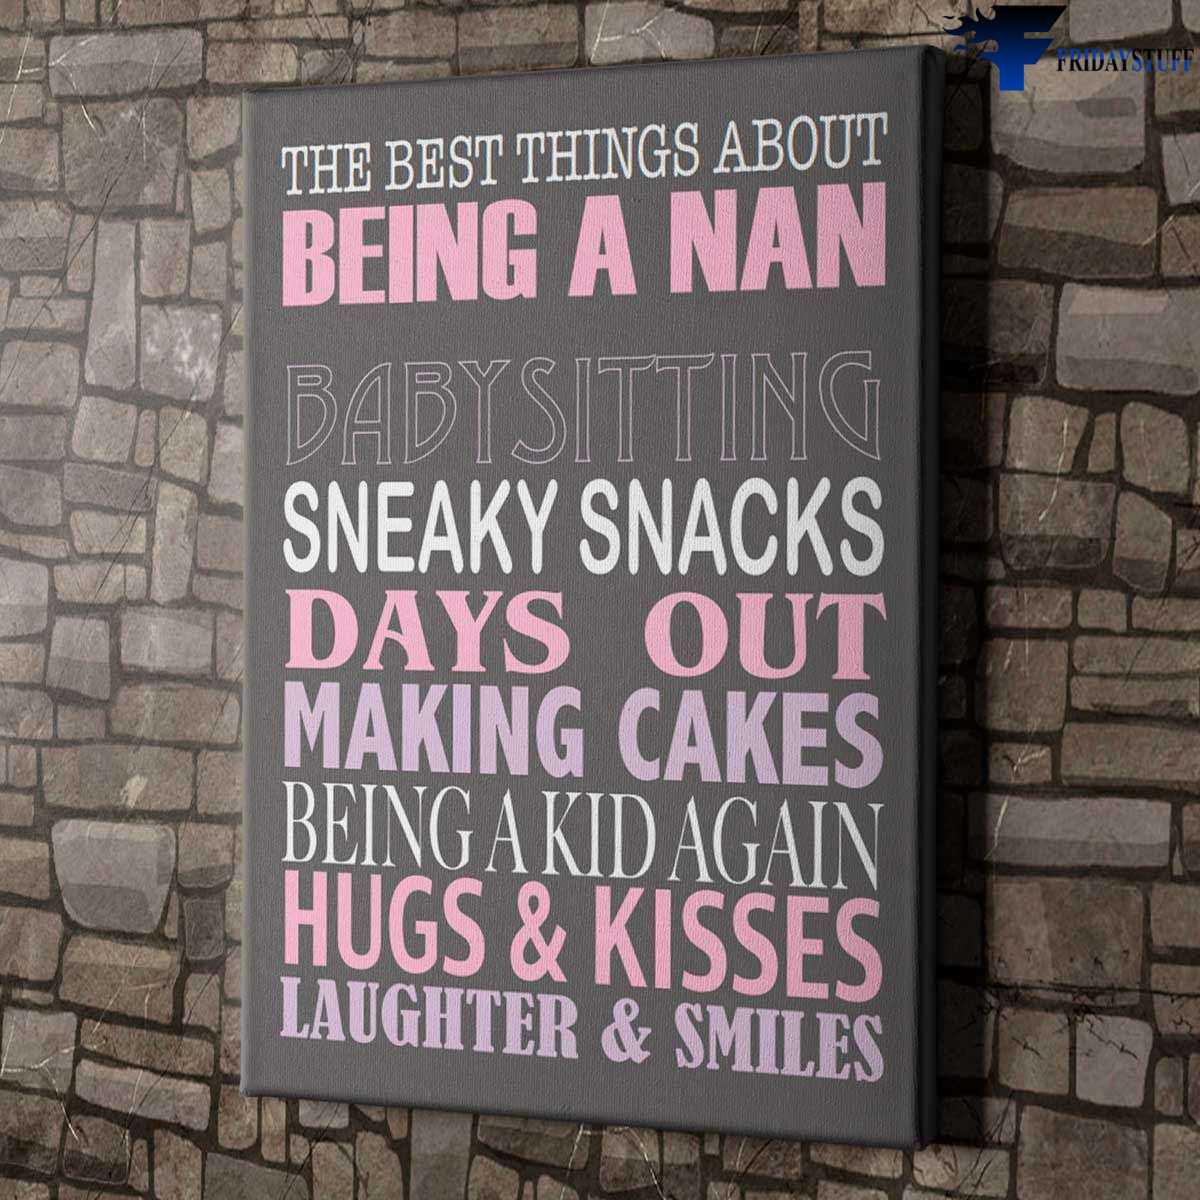 The Best Things About Being A Nan, Baby Sitting, Sneaky Snacks, Days Out Making Cakes, Being And Kid Agian, Hugs And Kisses, Laughter And Smiles